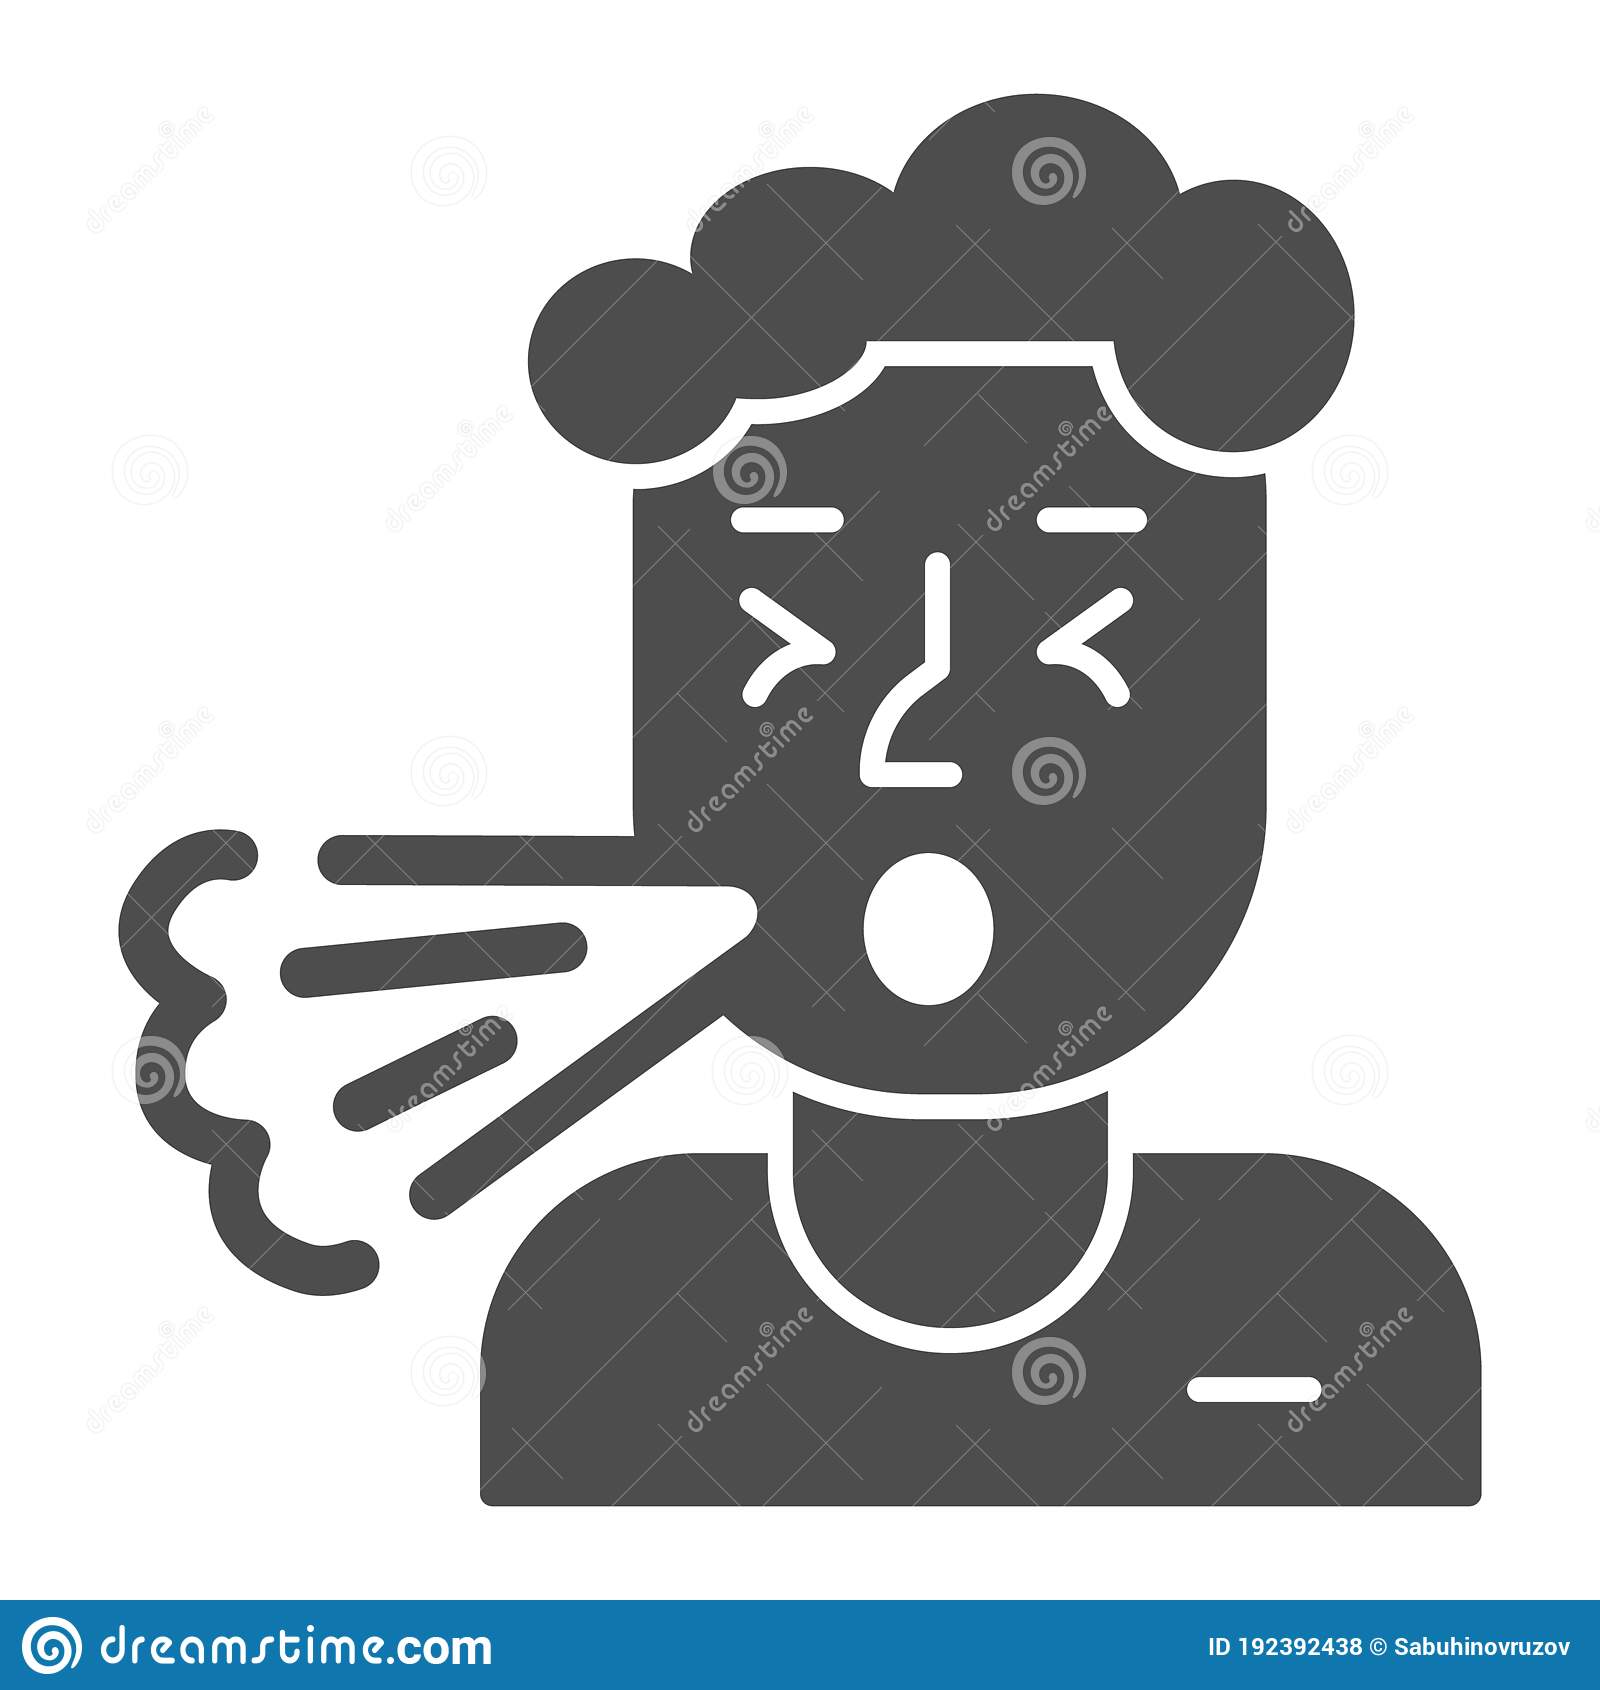 Man Coughing Solid Icon, Allergy Concept, Cough Sign On White ...